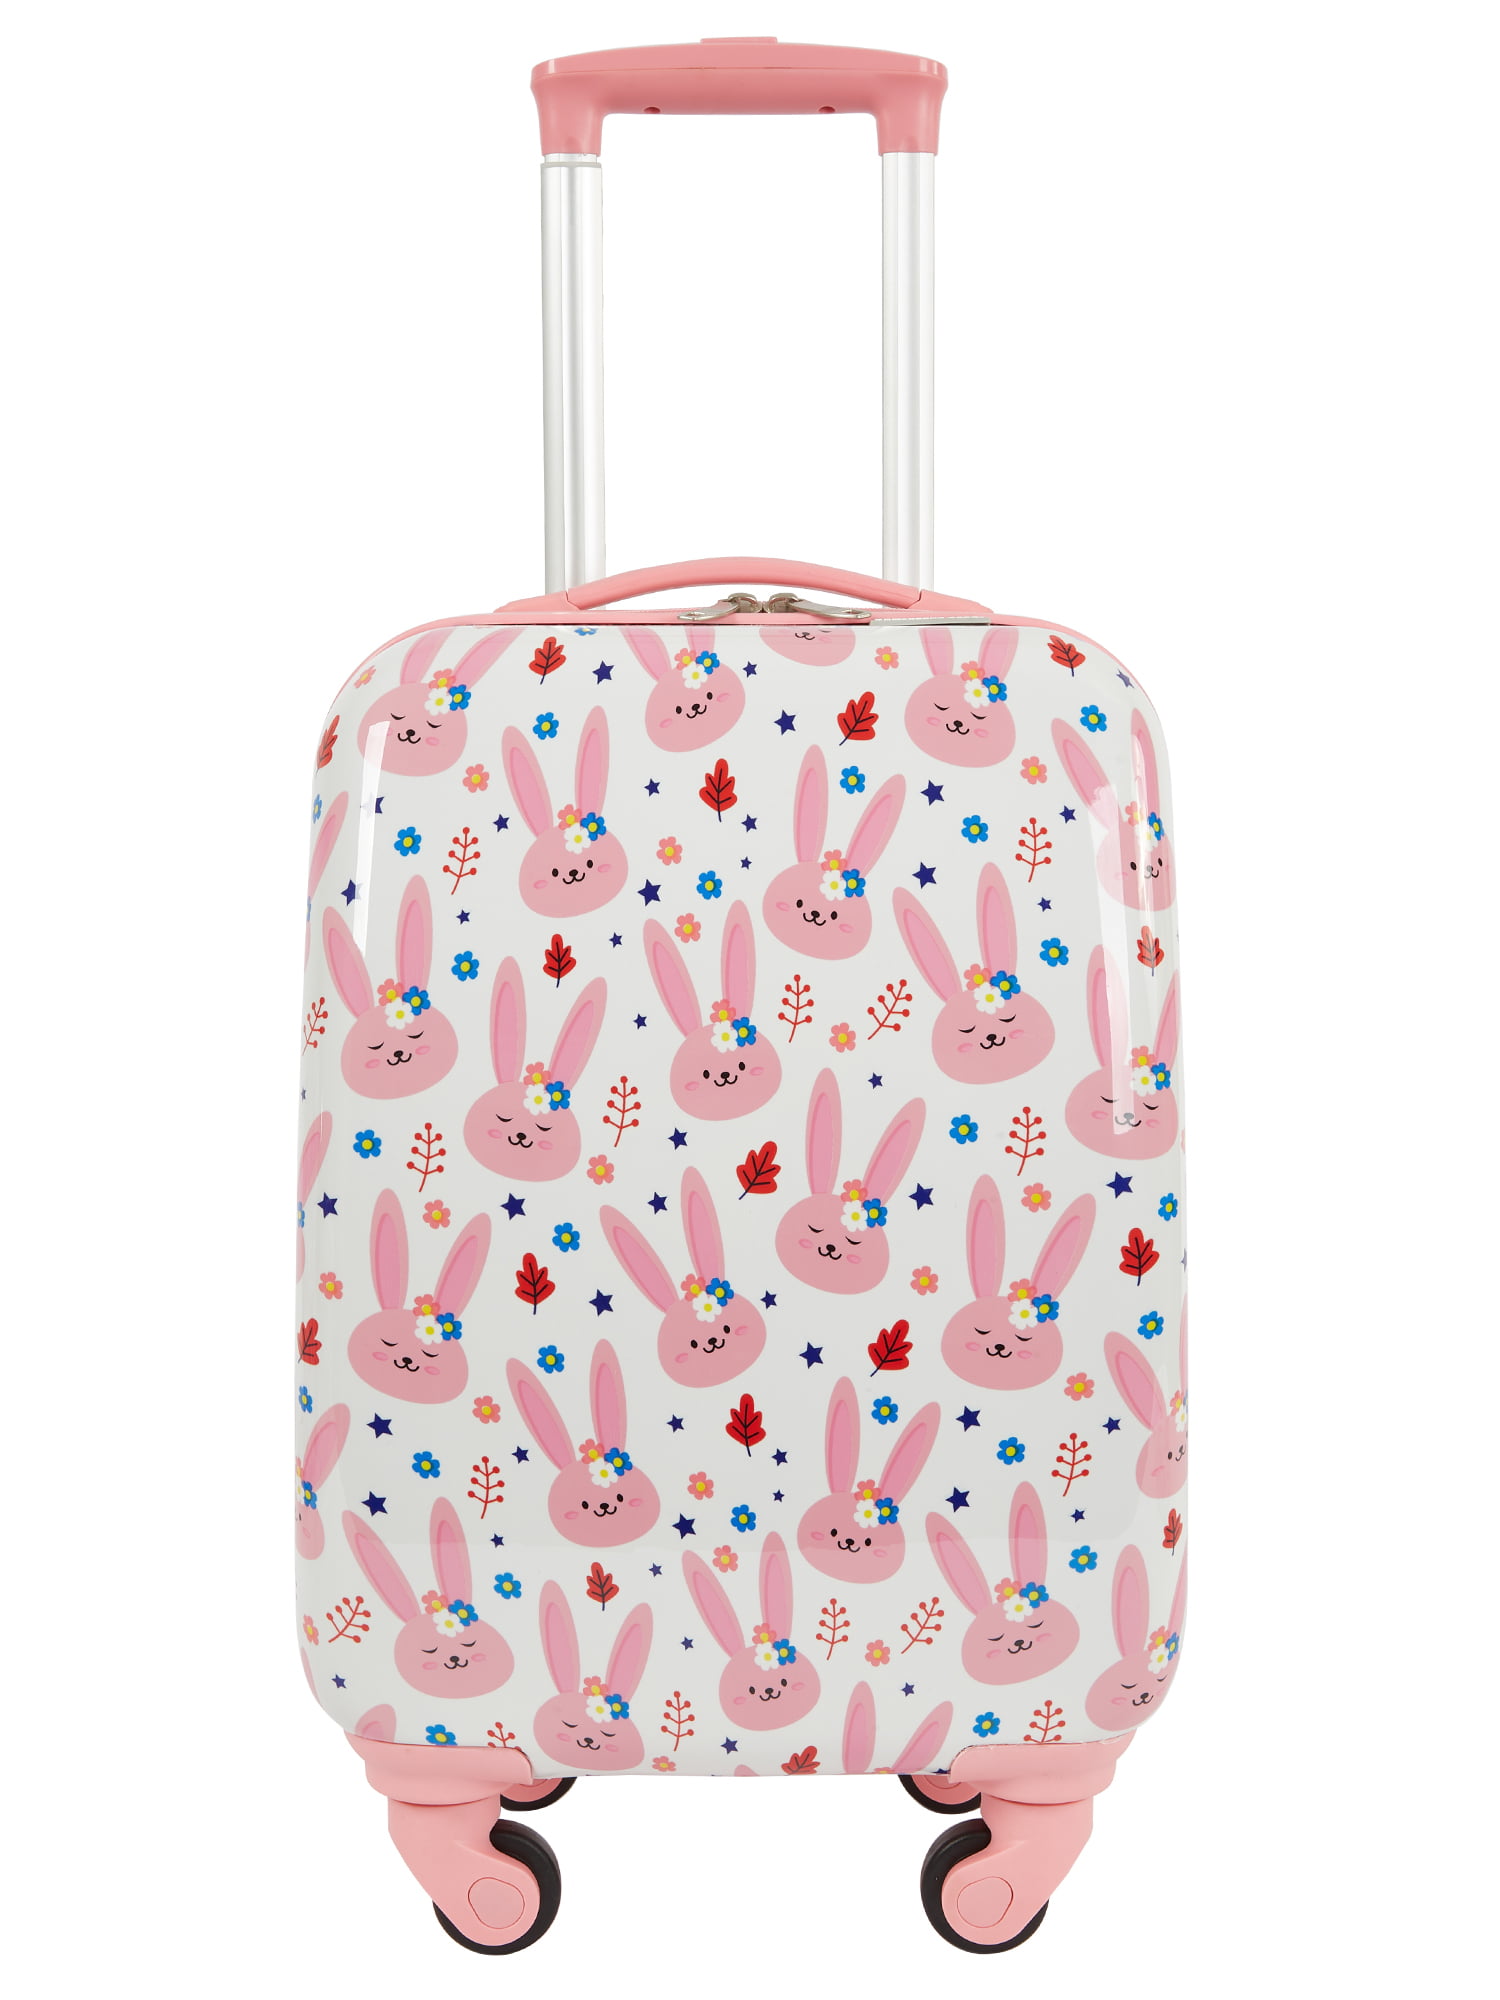 The Best Kids' Luggage, According to Lab Testing